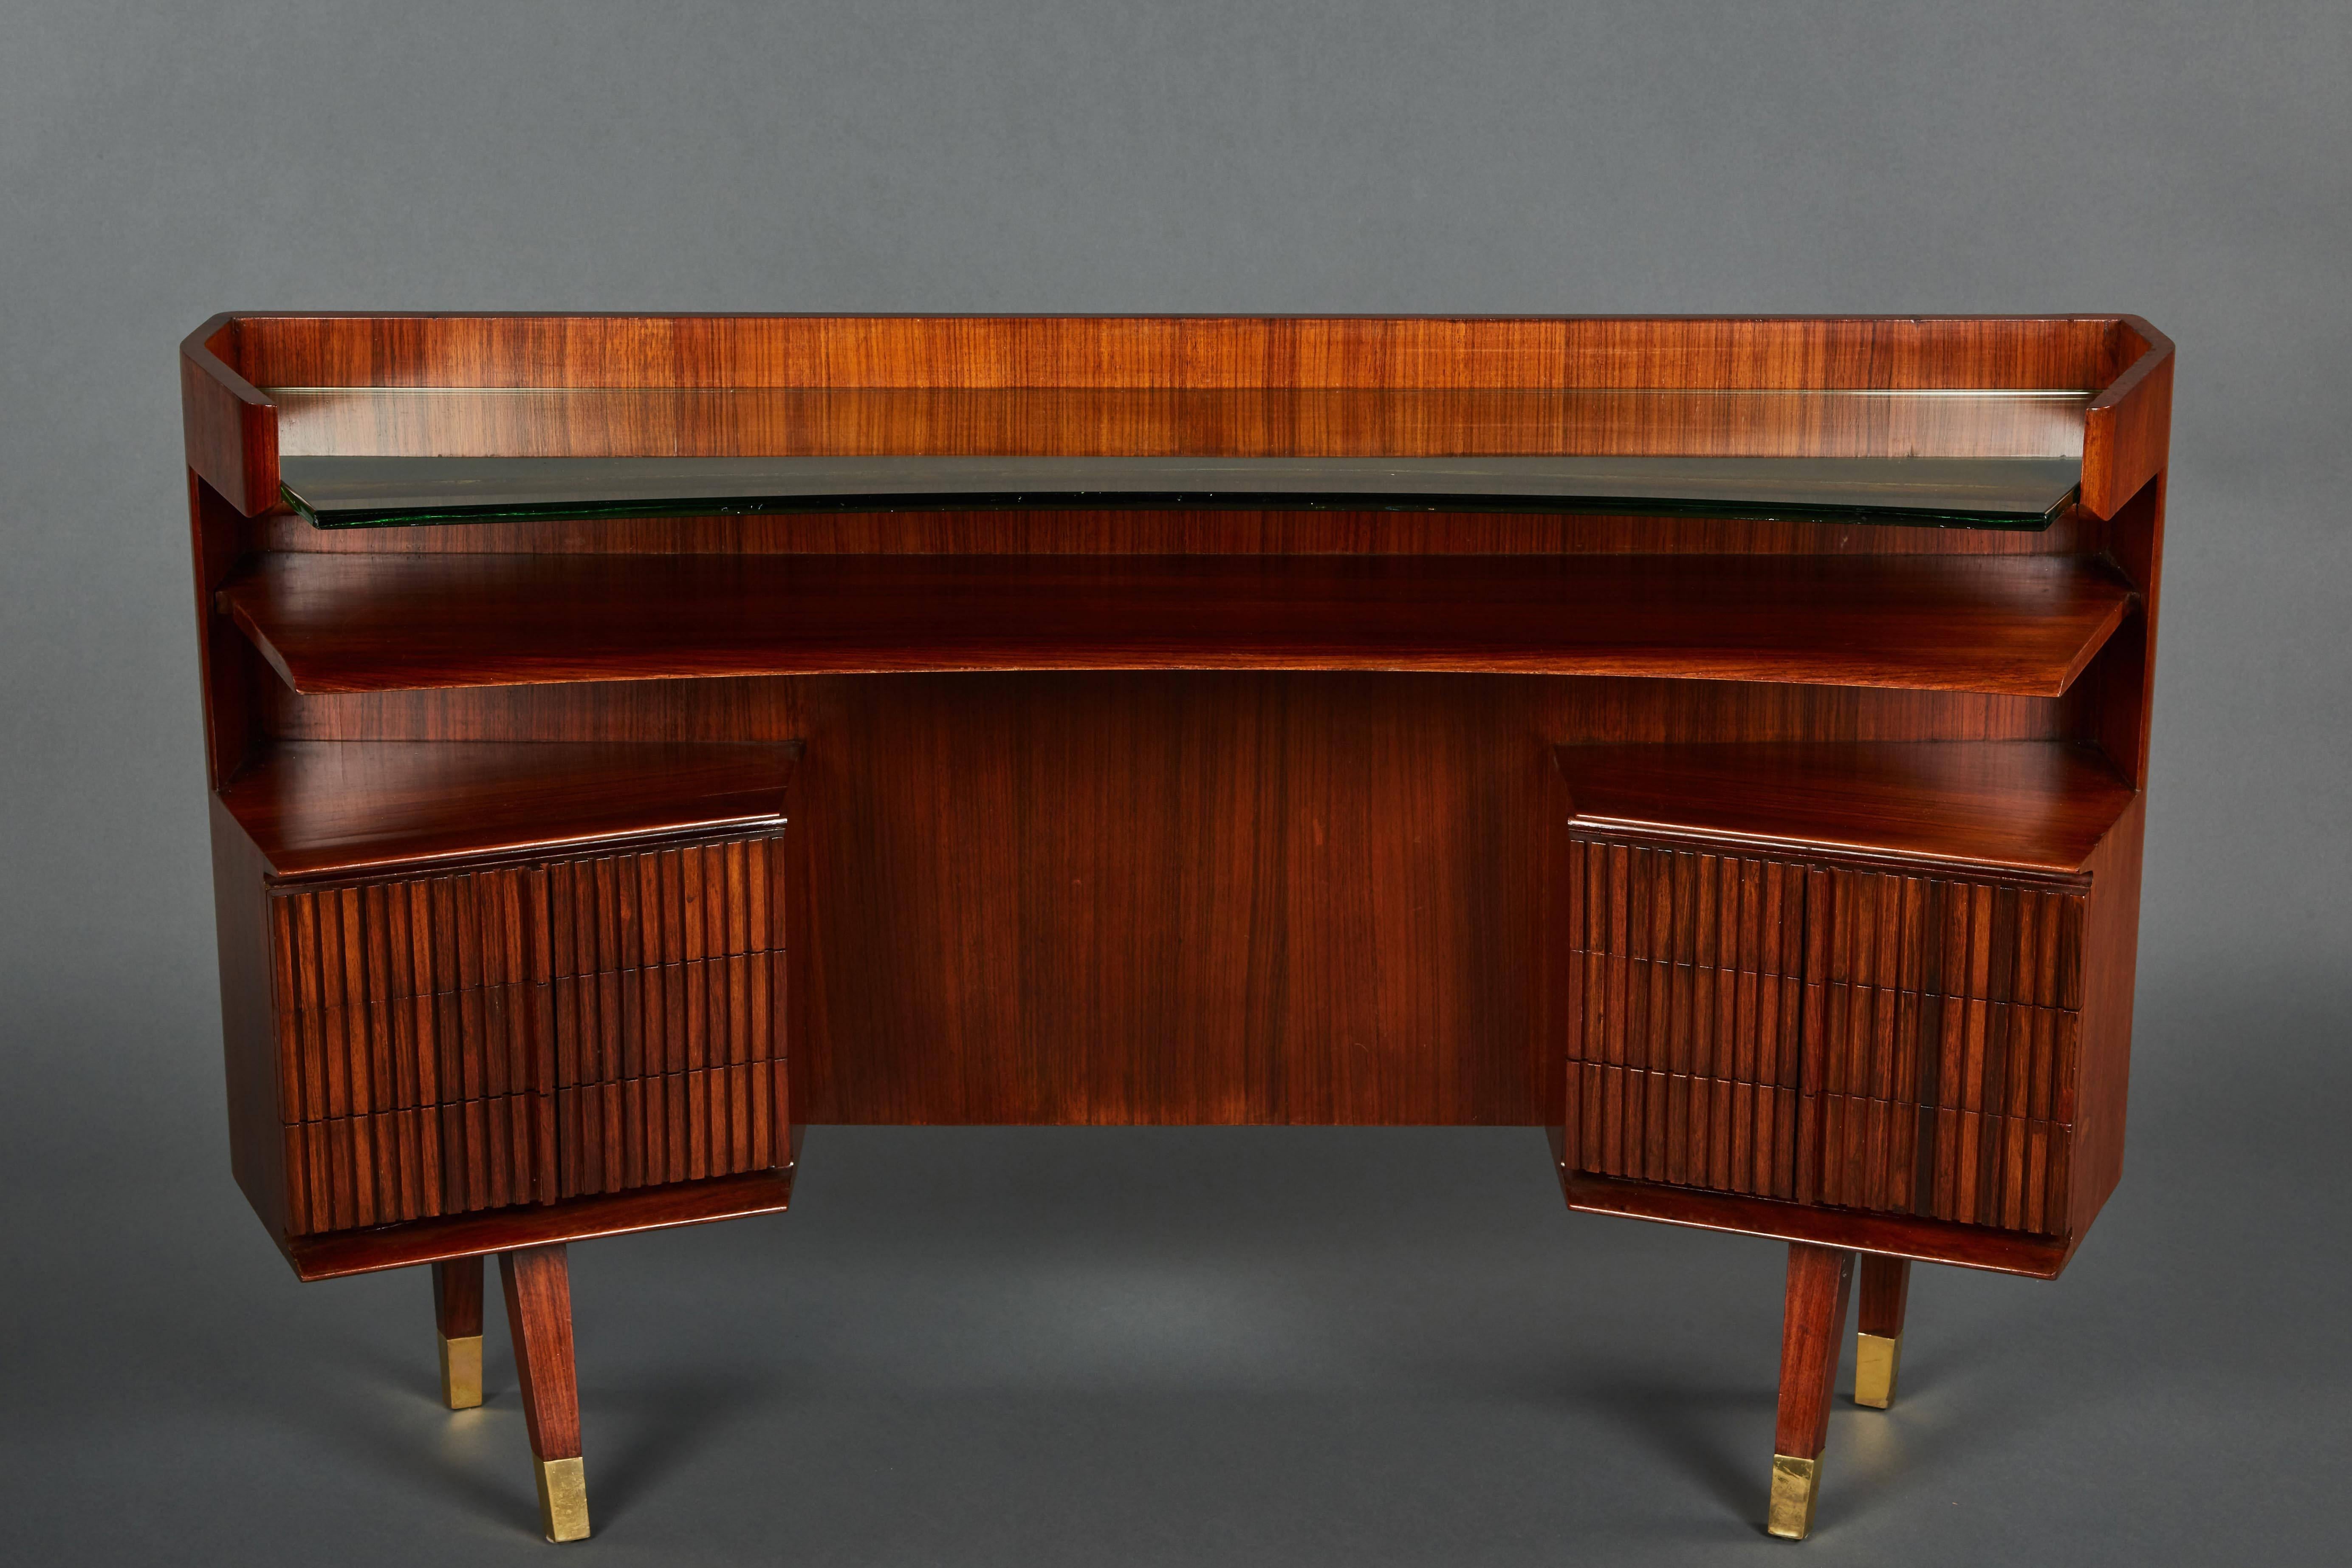 A rare console/desk attributed to Luisa and Ico Parisi. Petite with a curved design and glass top. Each side features a bank of three drawers, exhibiting pleasing, ridged details. Legs are finished with brass sabots. Body of desk is 10” deep.